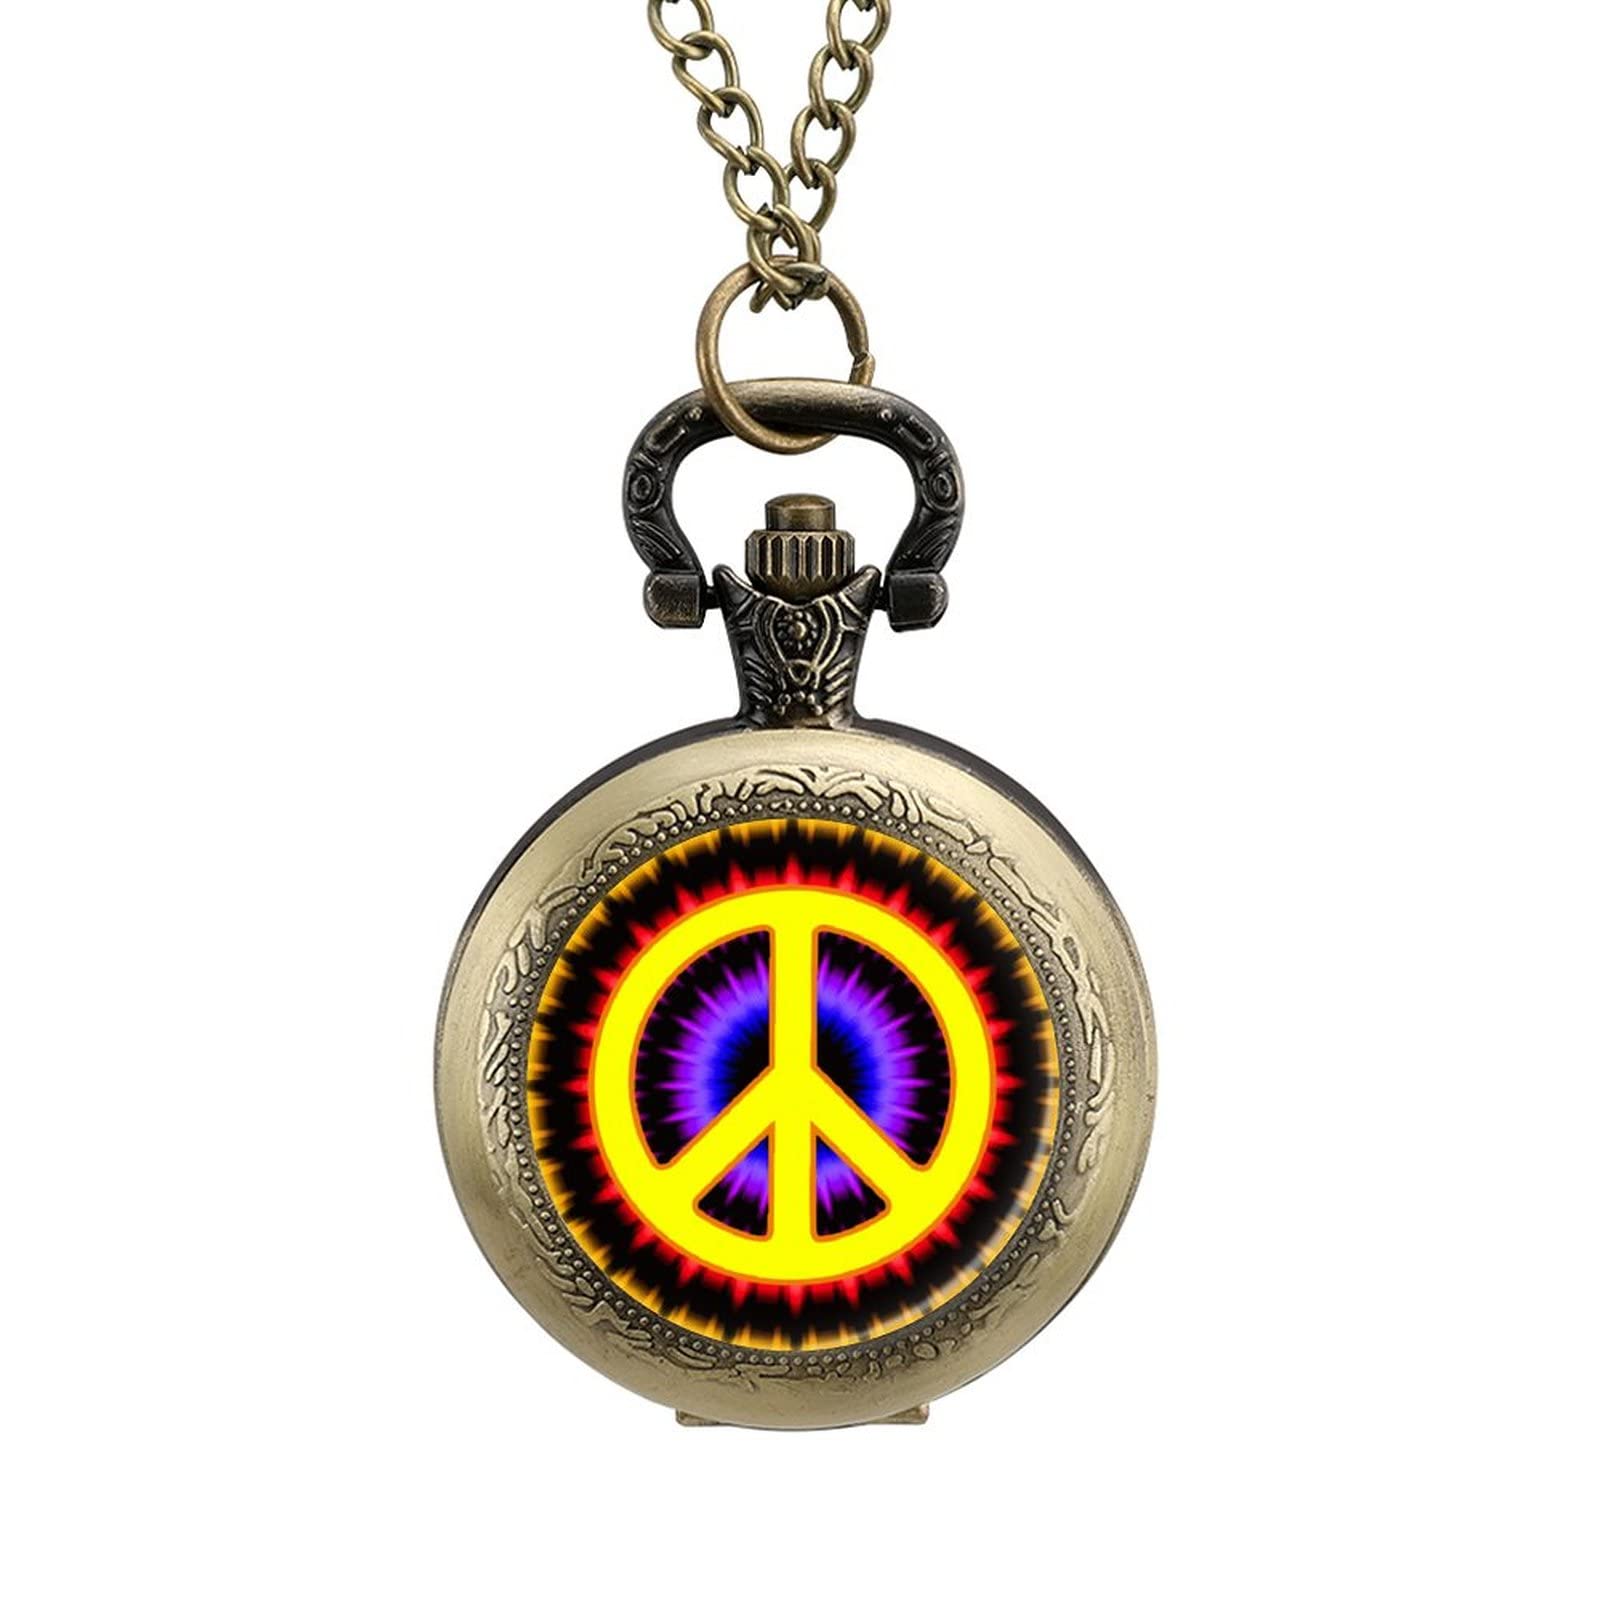 Tie Dye Peace Sign Pocket Watch Vintage Pendant Watches Necklace with Chain Gifts for Birthday